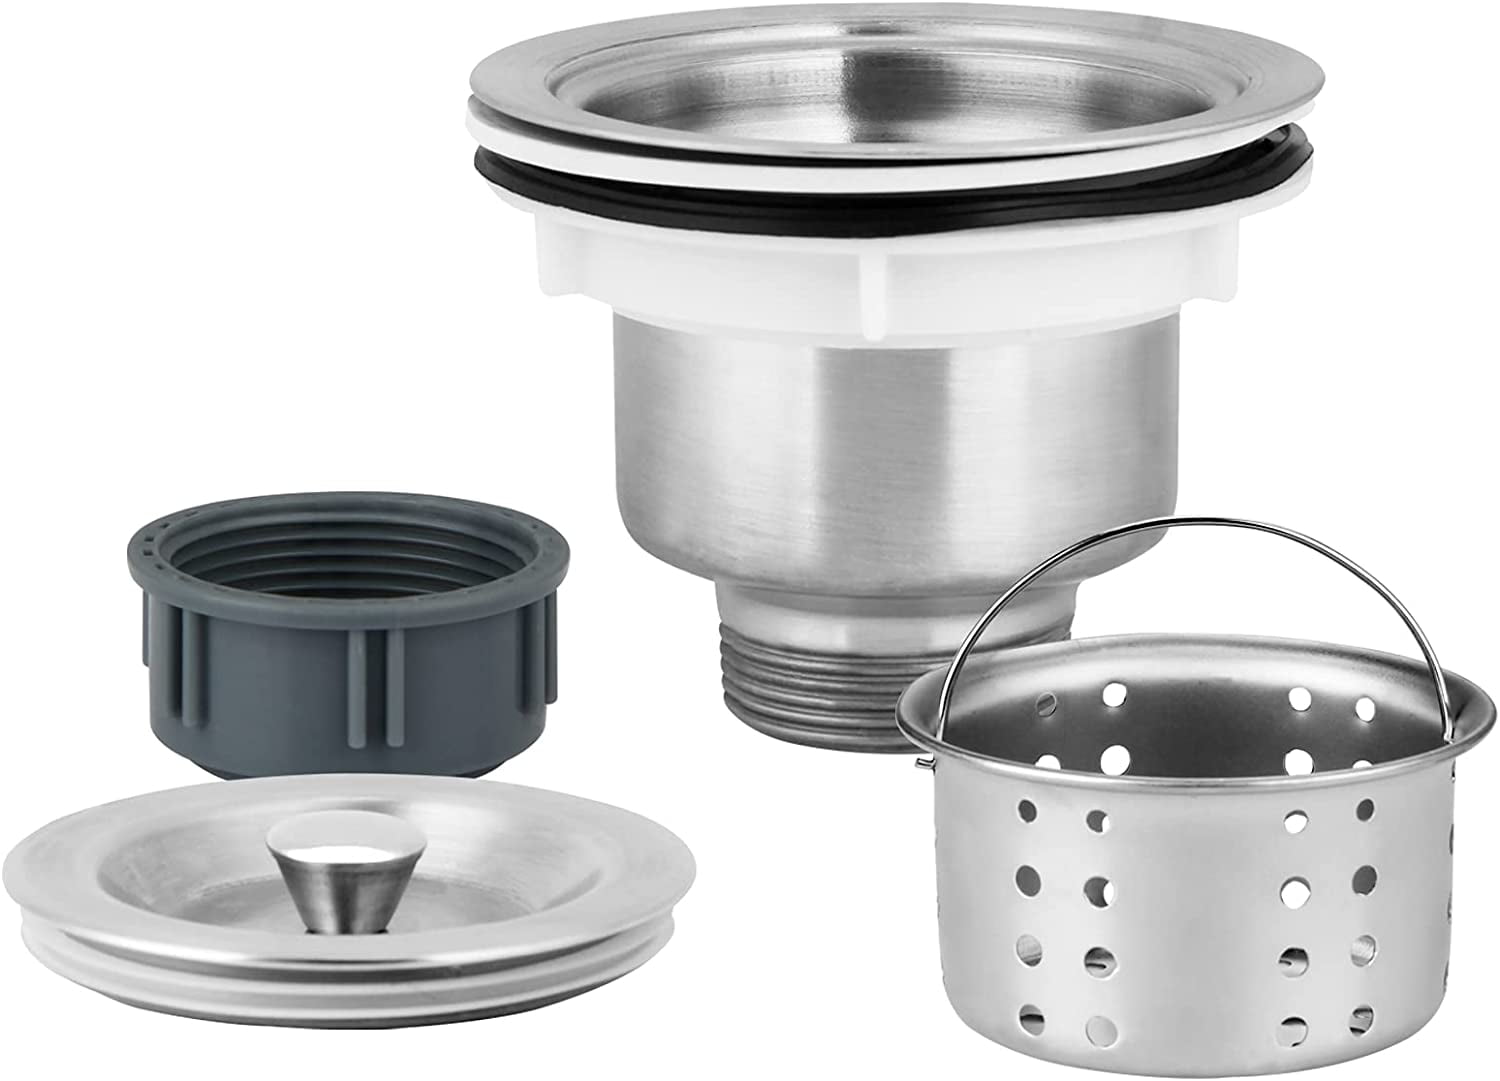 Kitchen Sink Drain Strainer Assembly Sink drain 304 Stainless Steel with Removable Deep Waste Basket and Sealing Lid 3-1/2-inch Silver